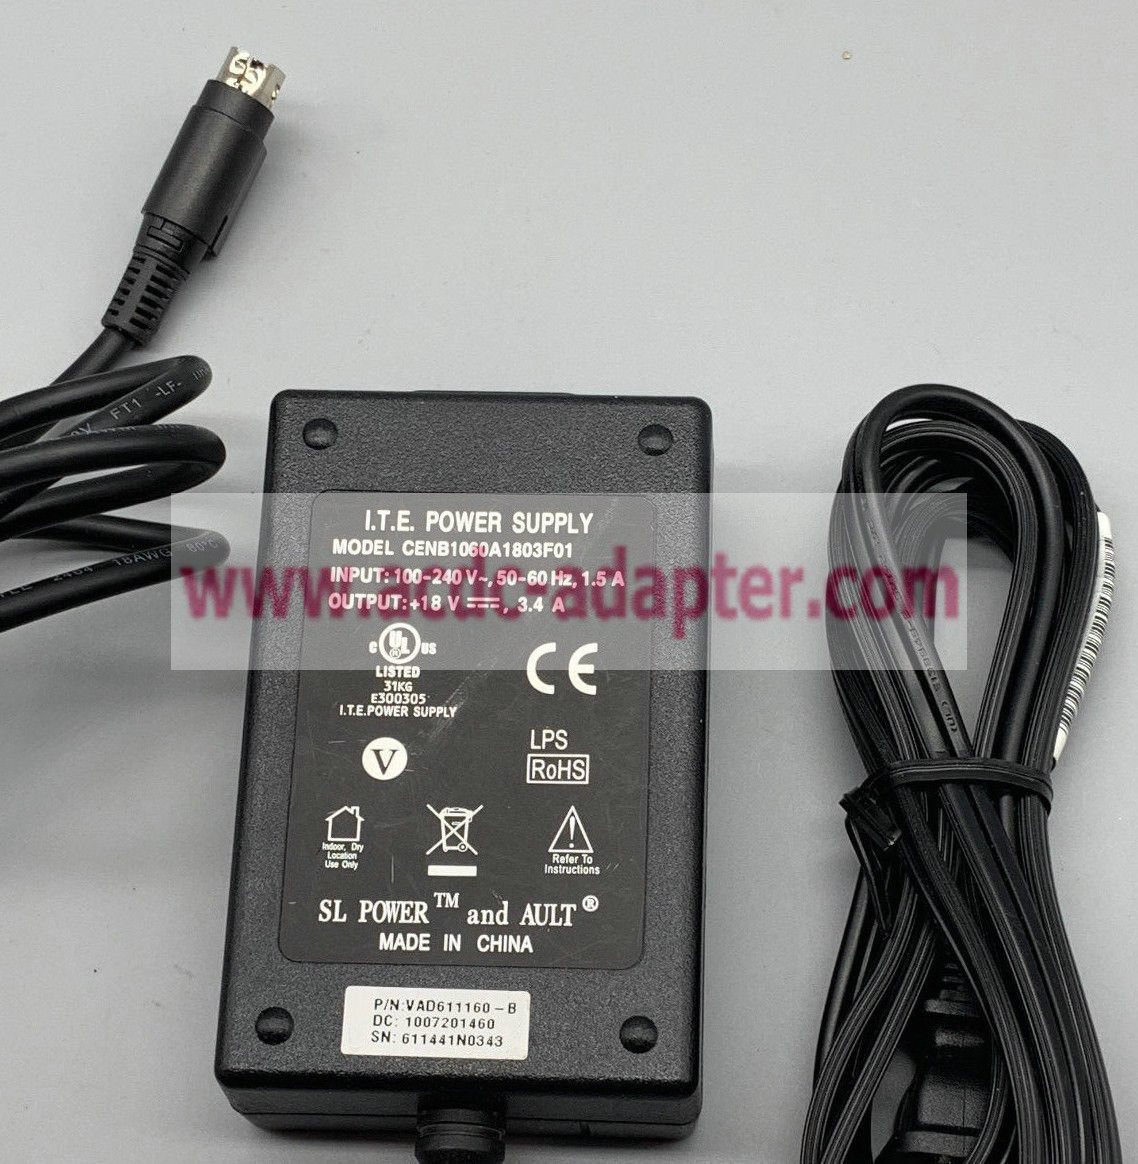 NEW ITE CENB1060A1803F01 18V 3.4A Switching Power Supply AC Adapter 4 PIN